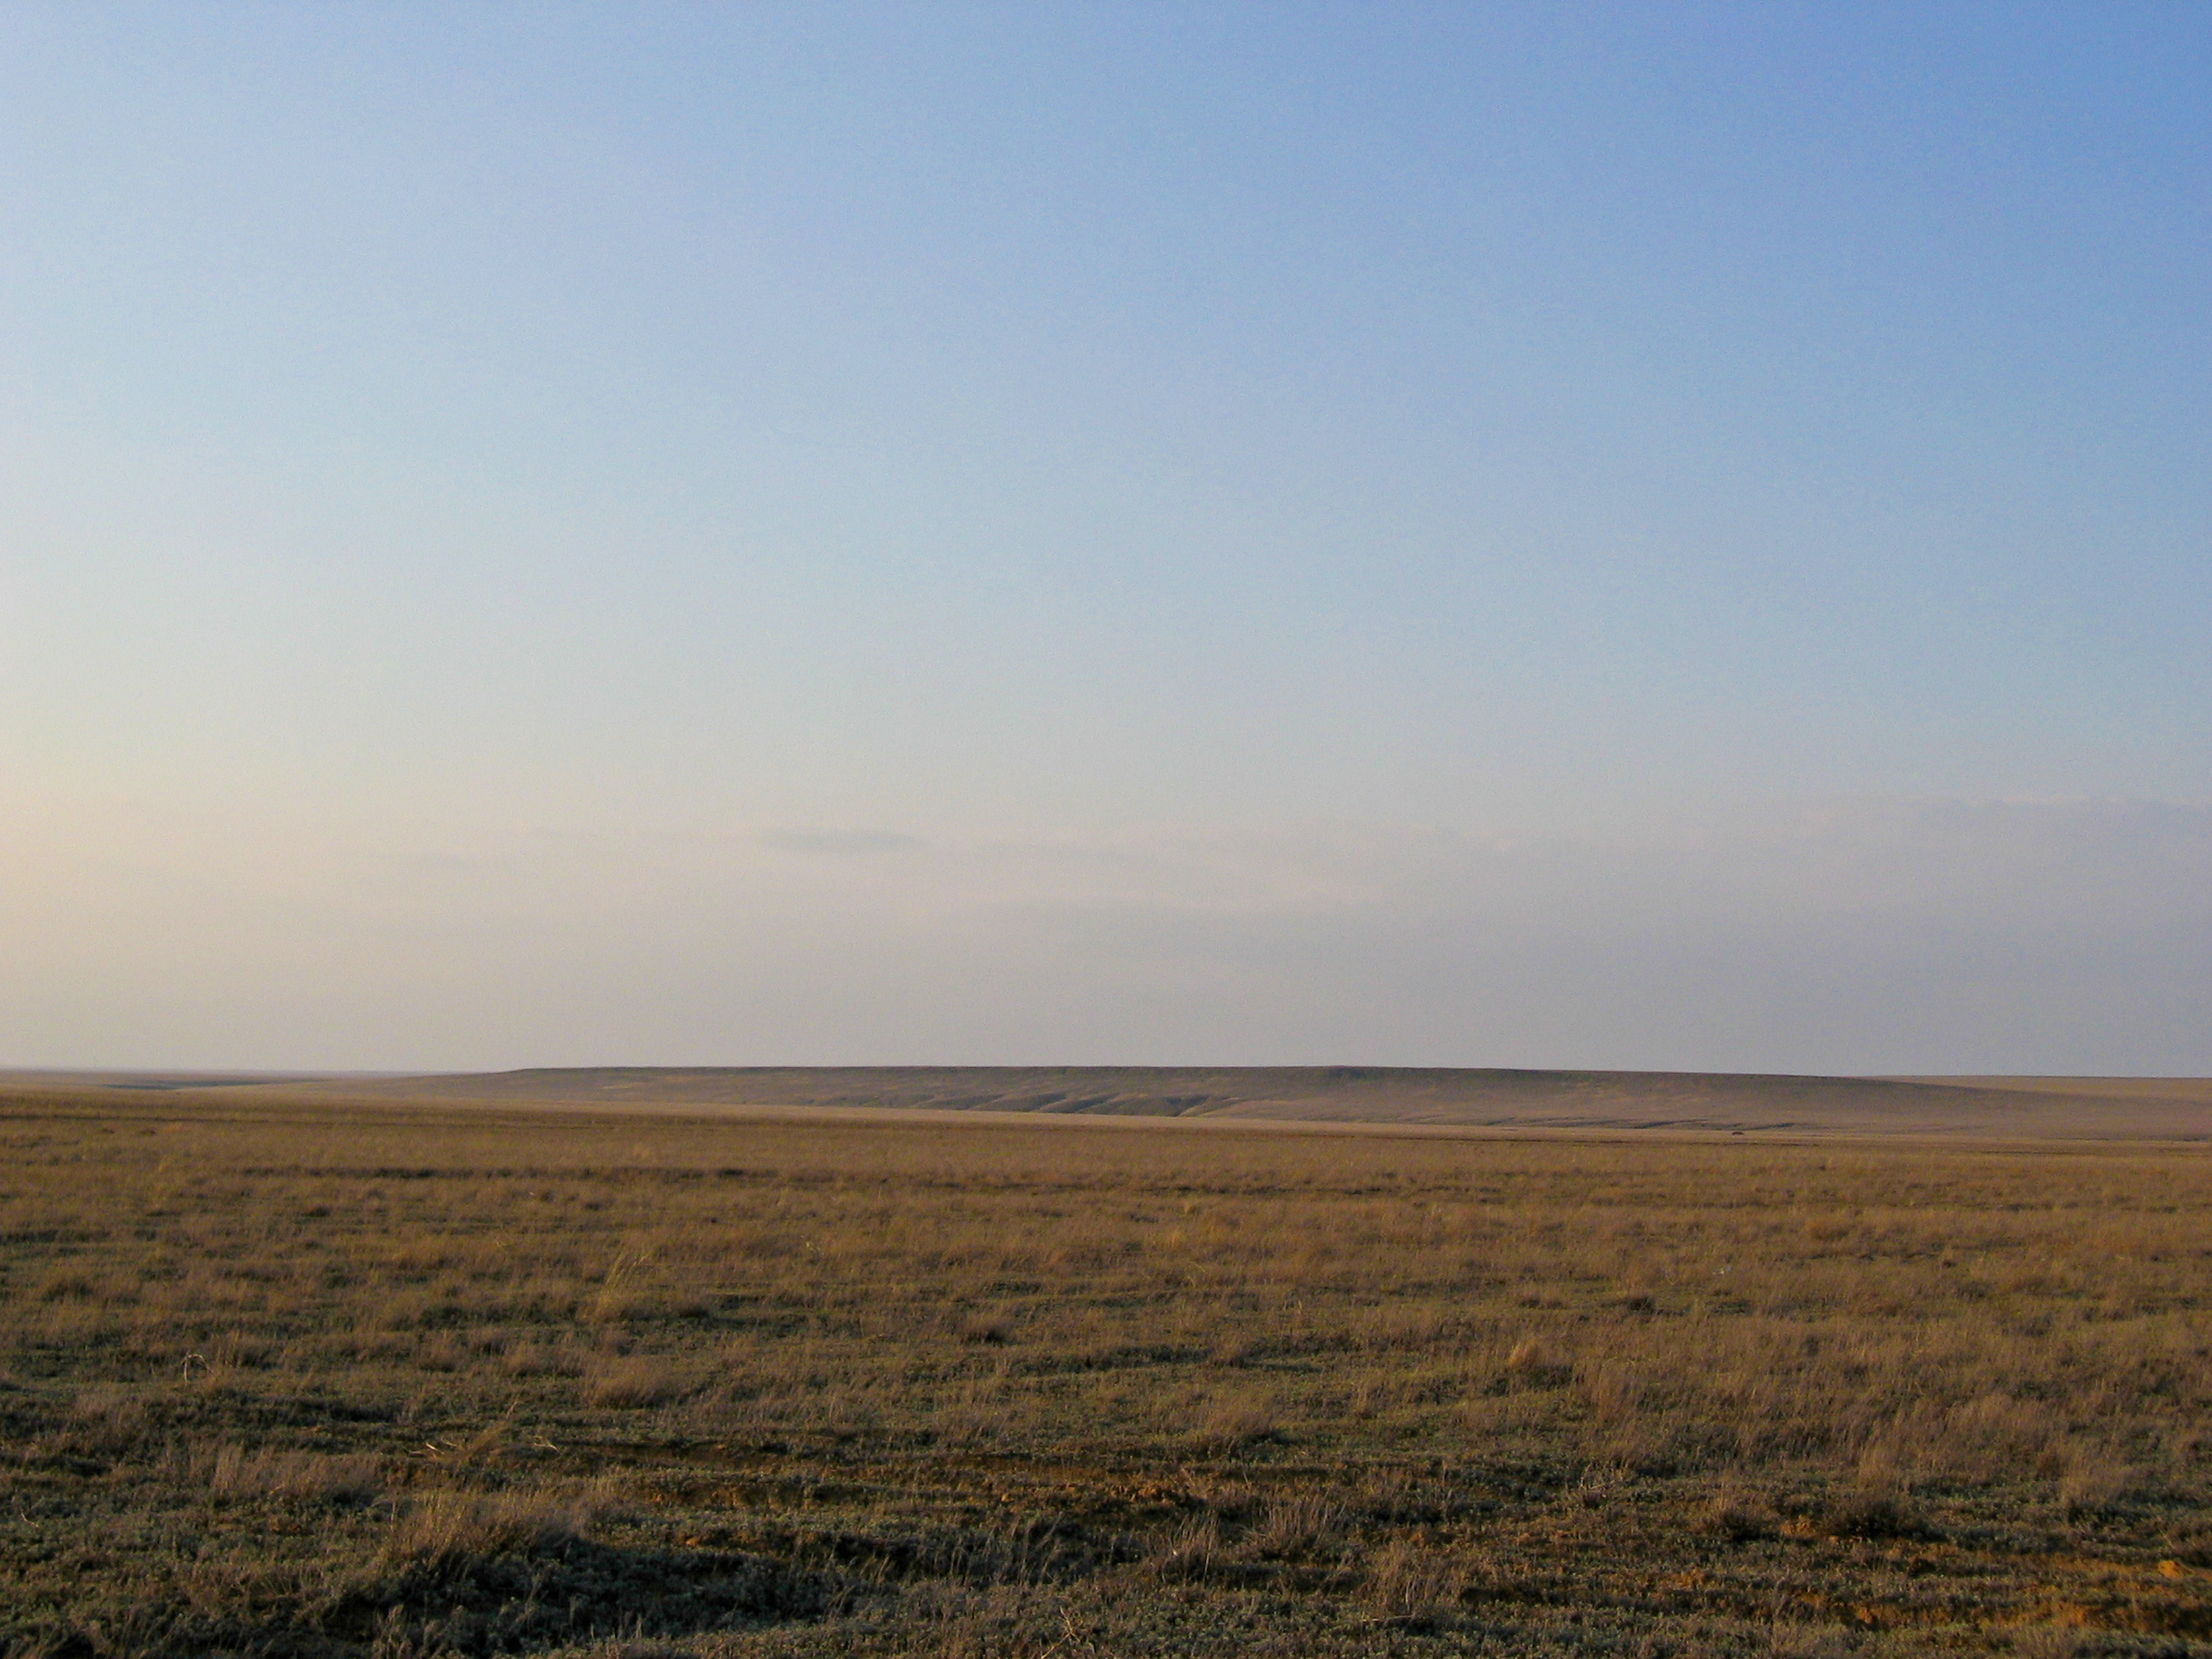 Photograph of a shortgrass steppe landscape in western Kazakhstan. The photo shows a flat landscape with a long, low hill on the horizon. 